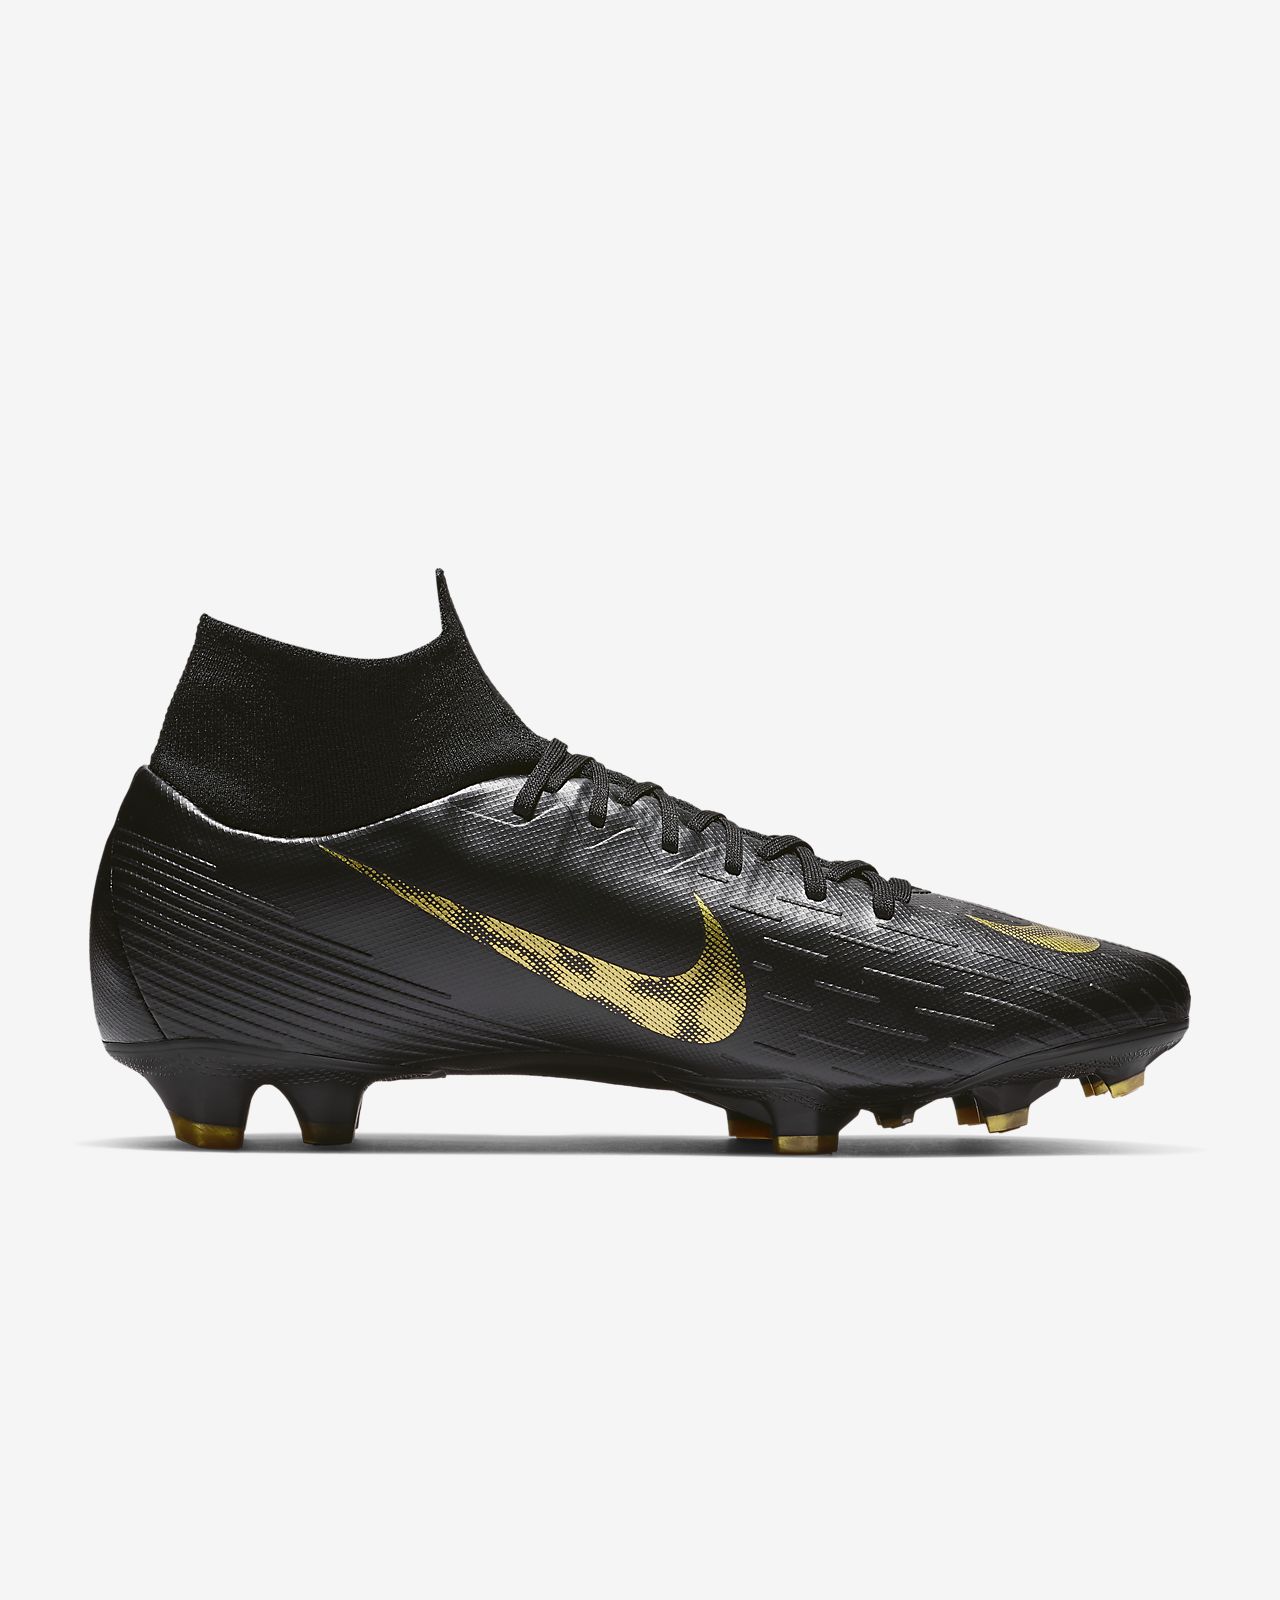 Nike Mercurial Superfly 7 Pro AG PRO. Football factor